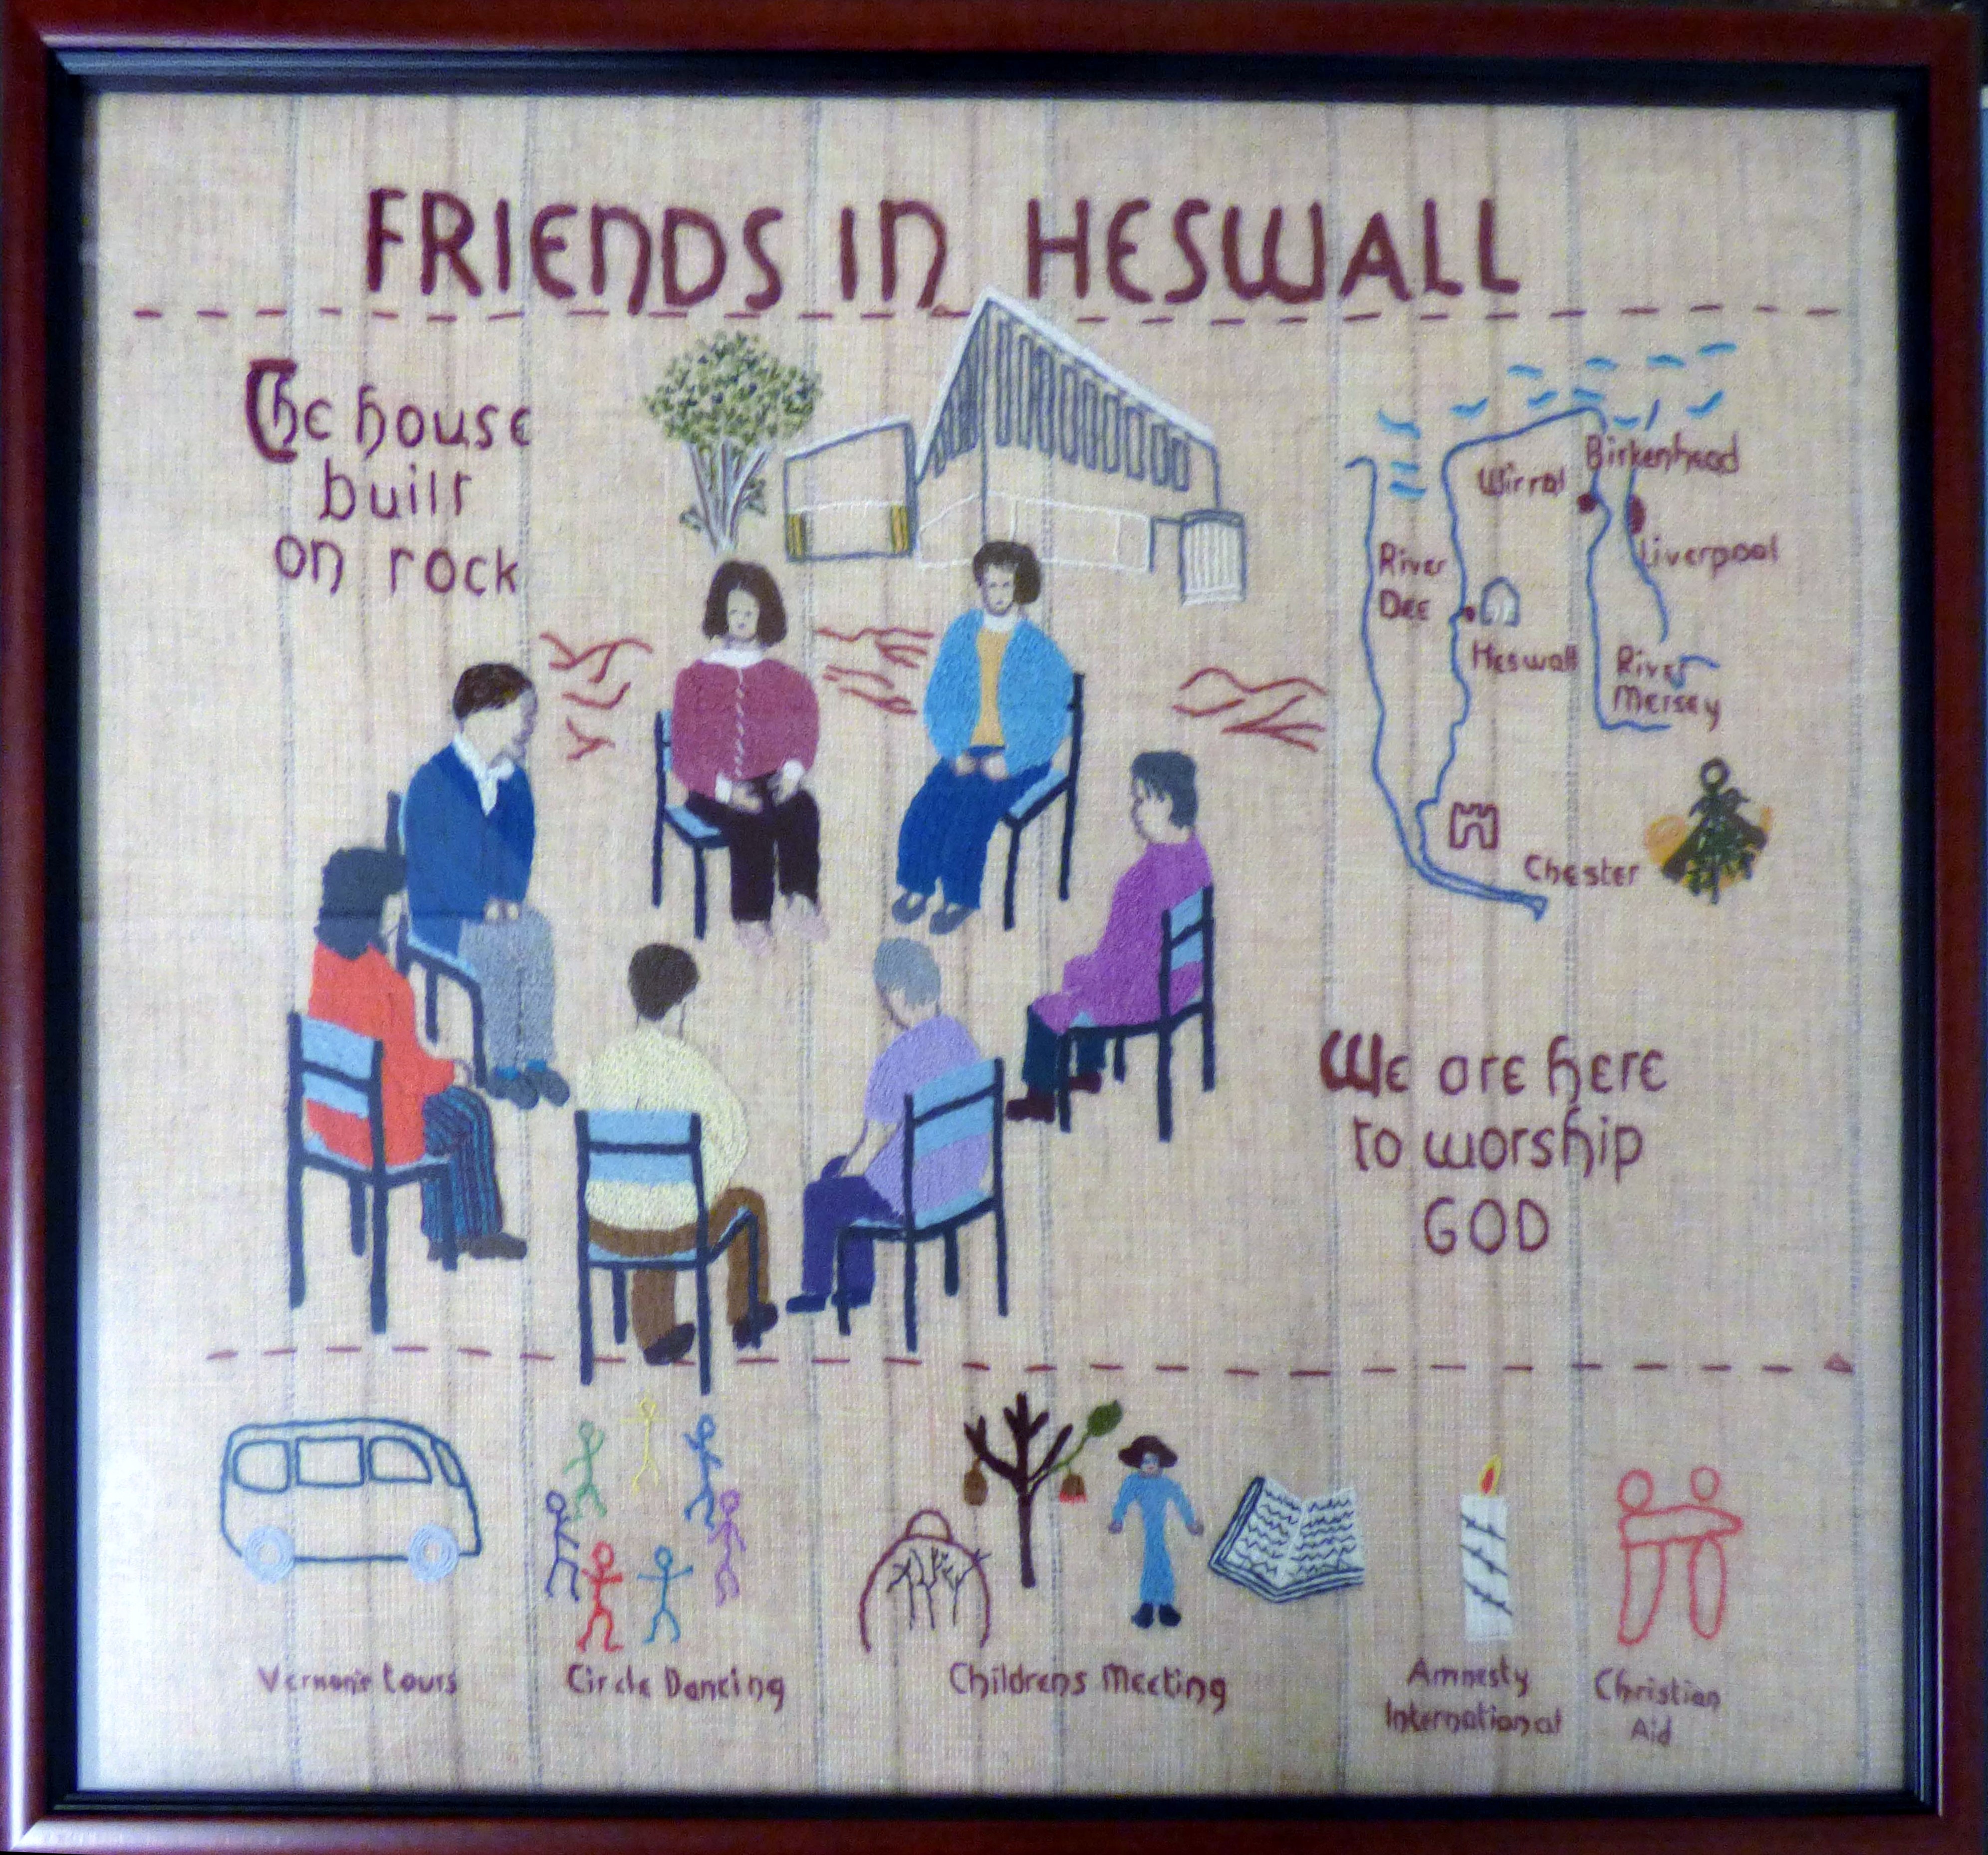 panel from the Quaker Tapestry made by a group in Heswall